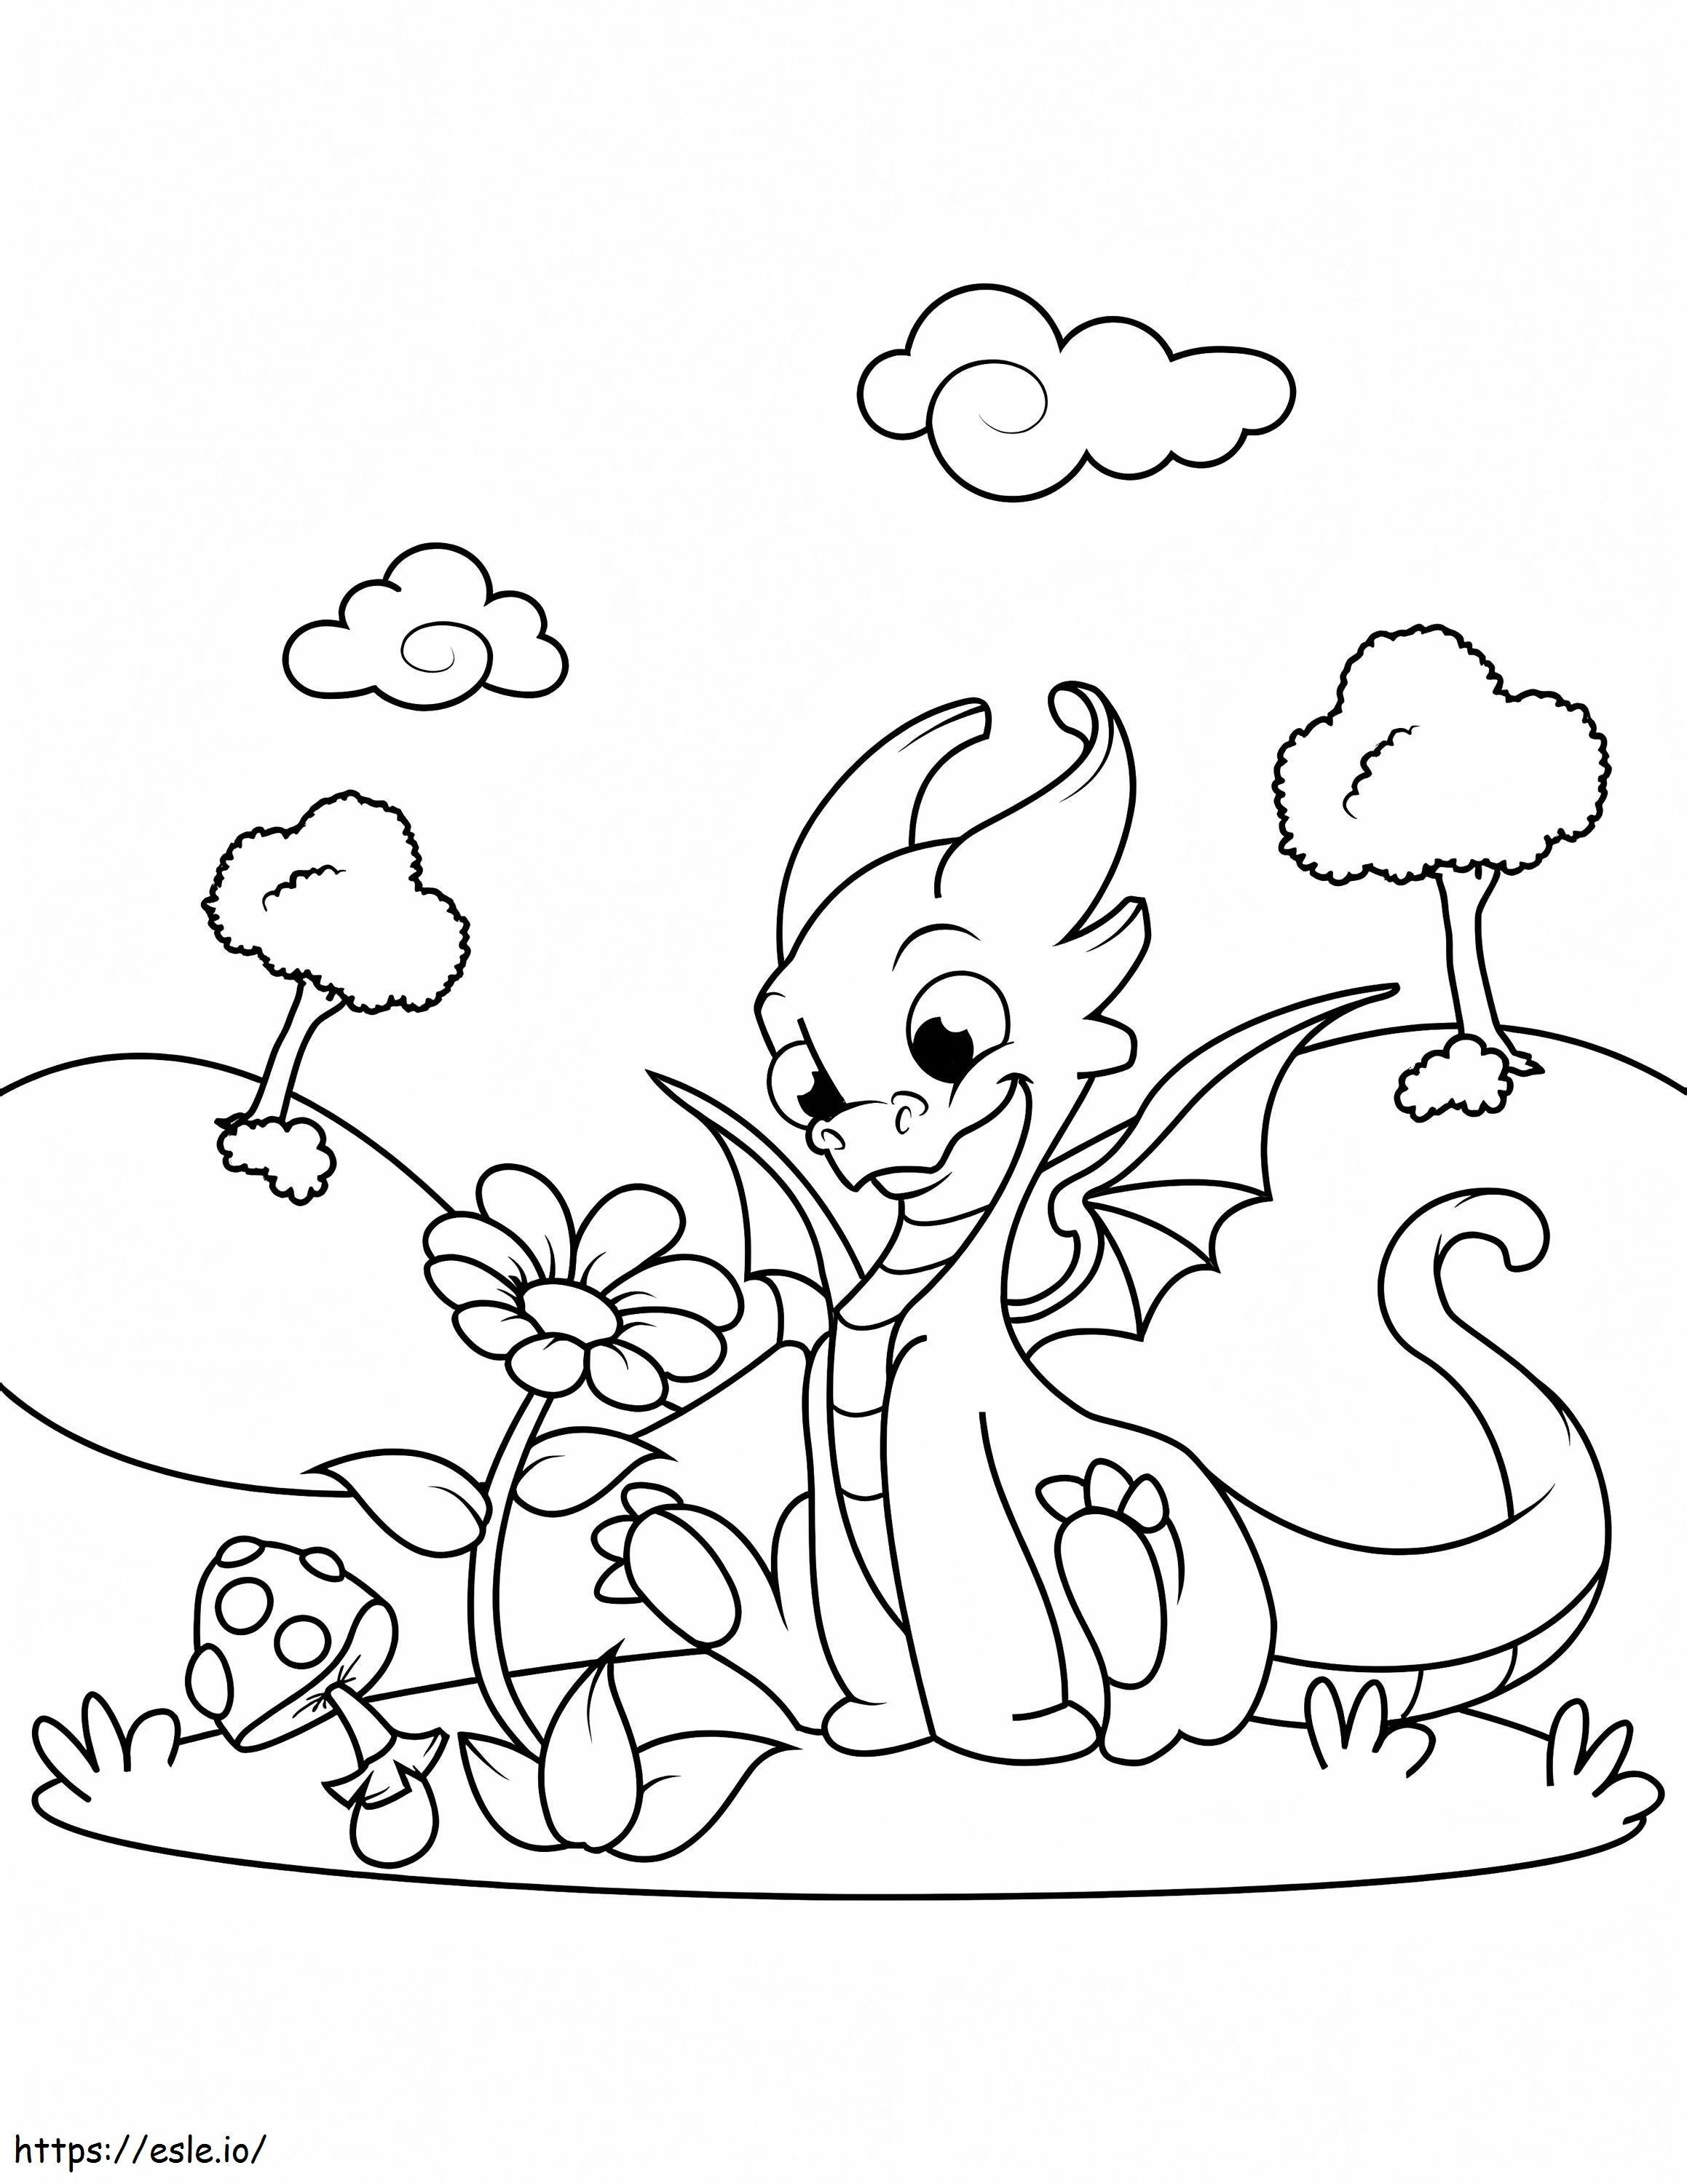 Dragon And Flower coloring page